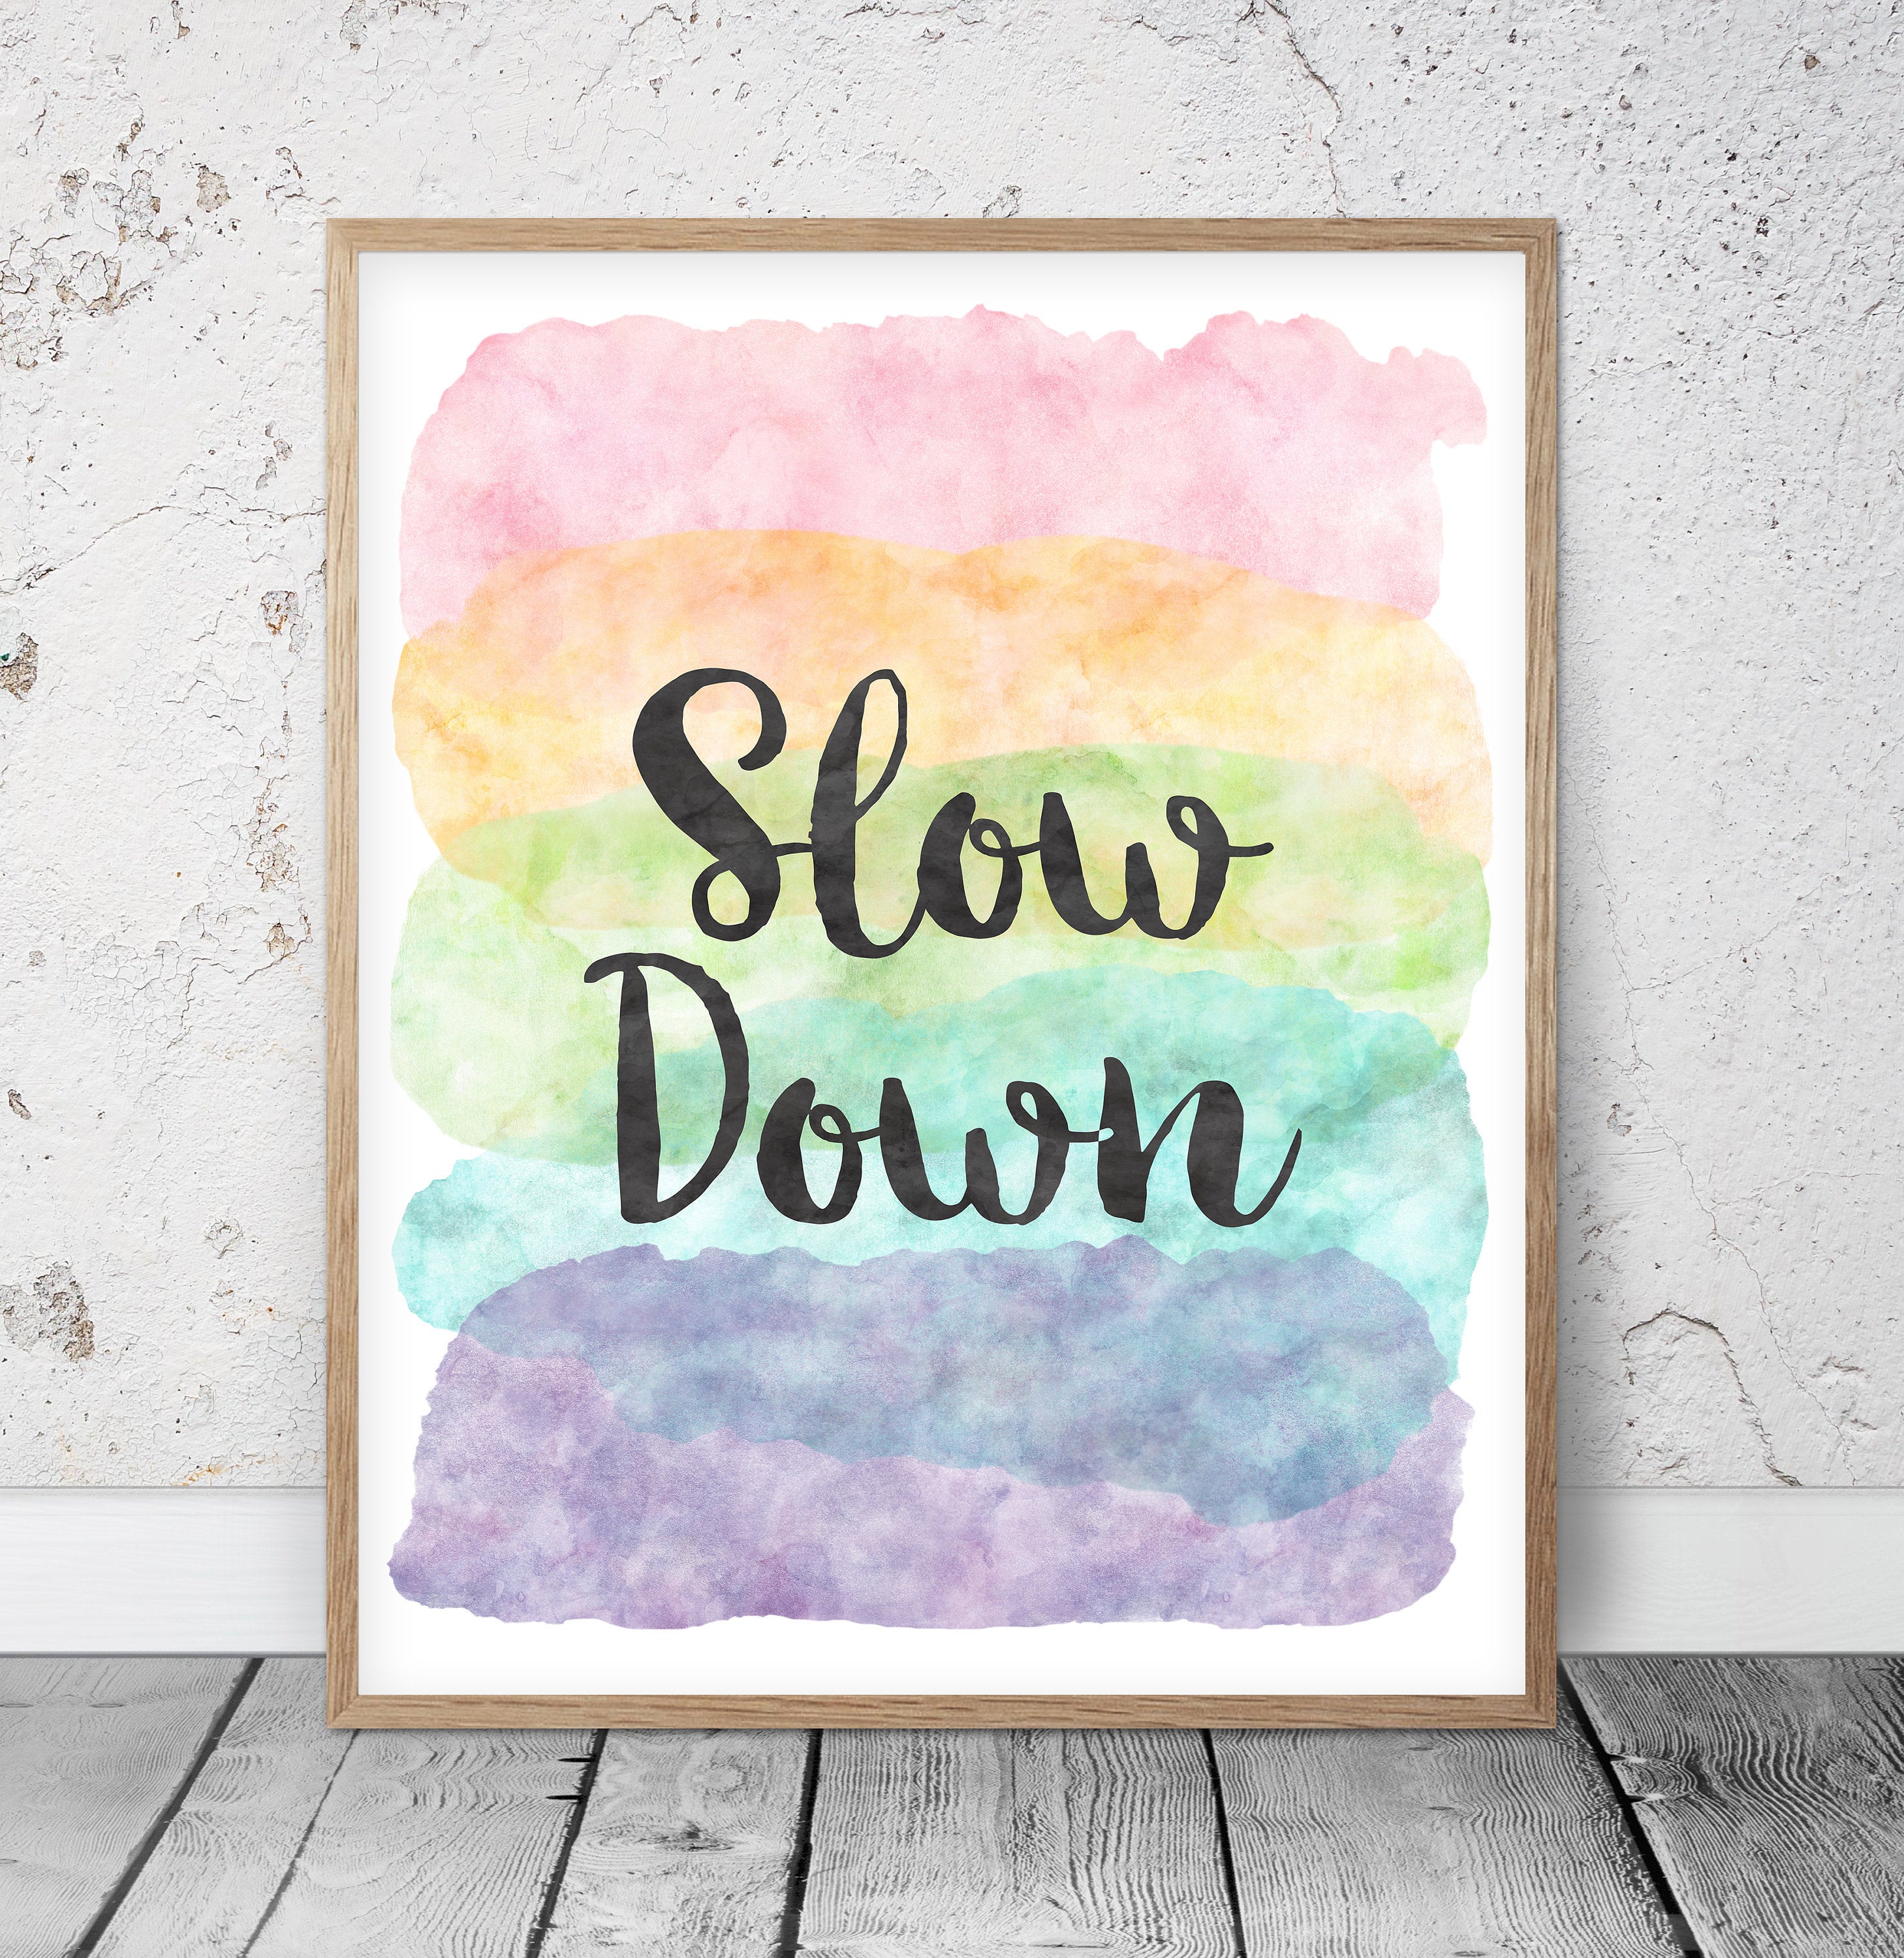 Slow Down Print,Printable Art, Typography Motivational Print, Quote Wall Hanging